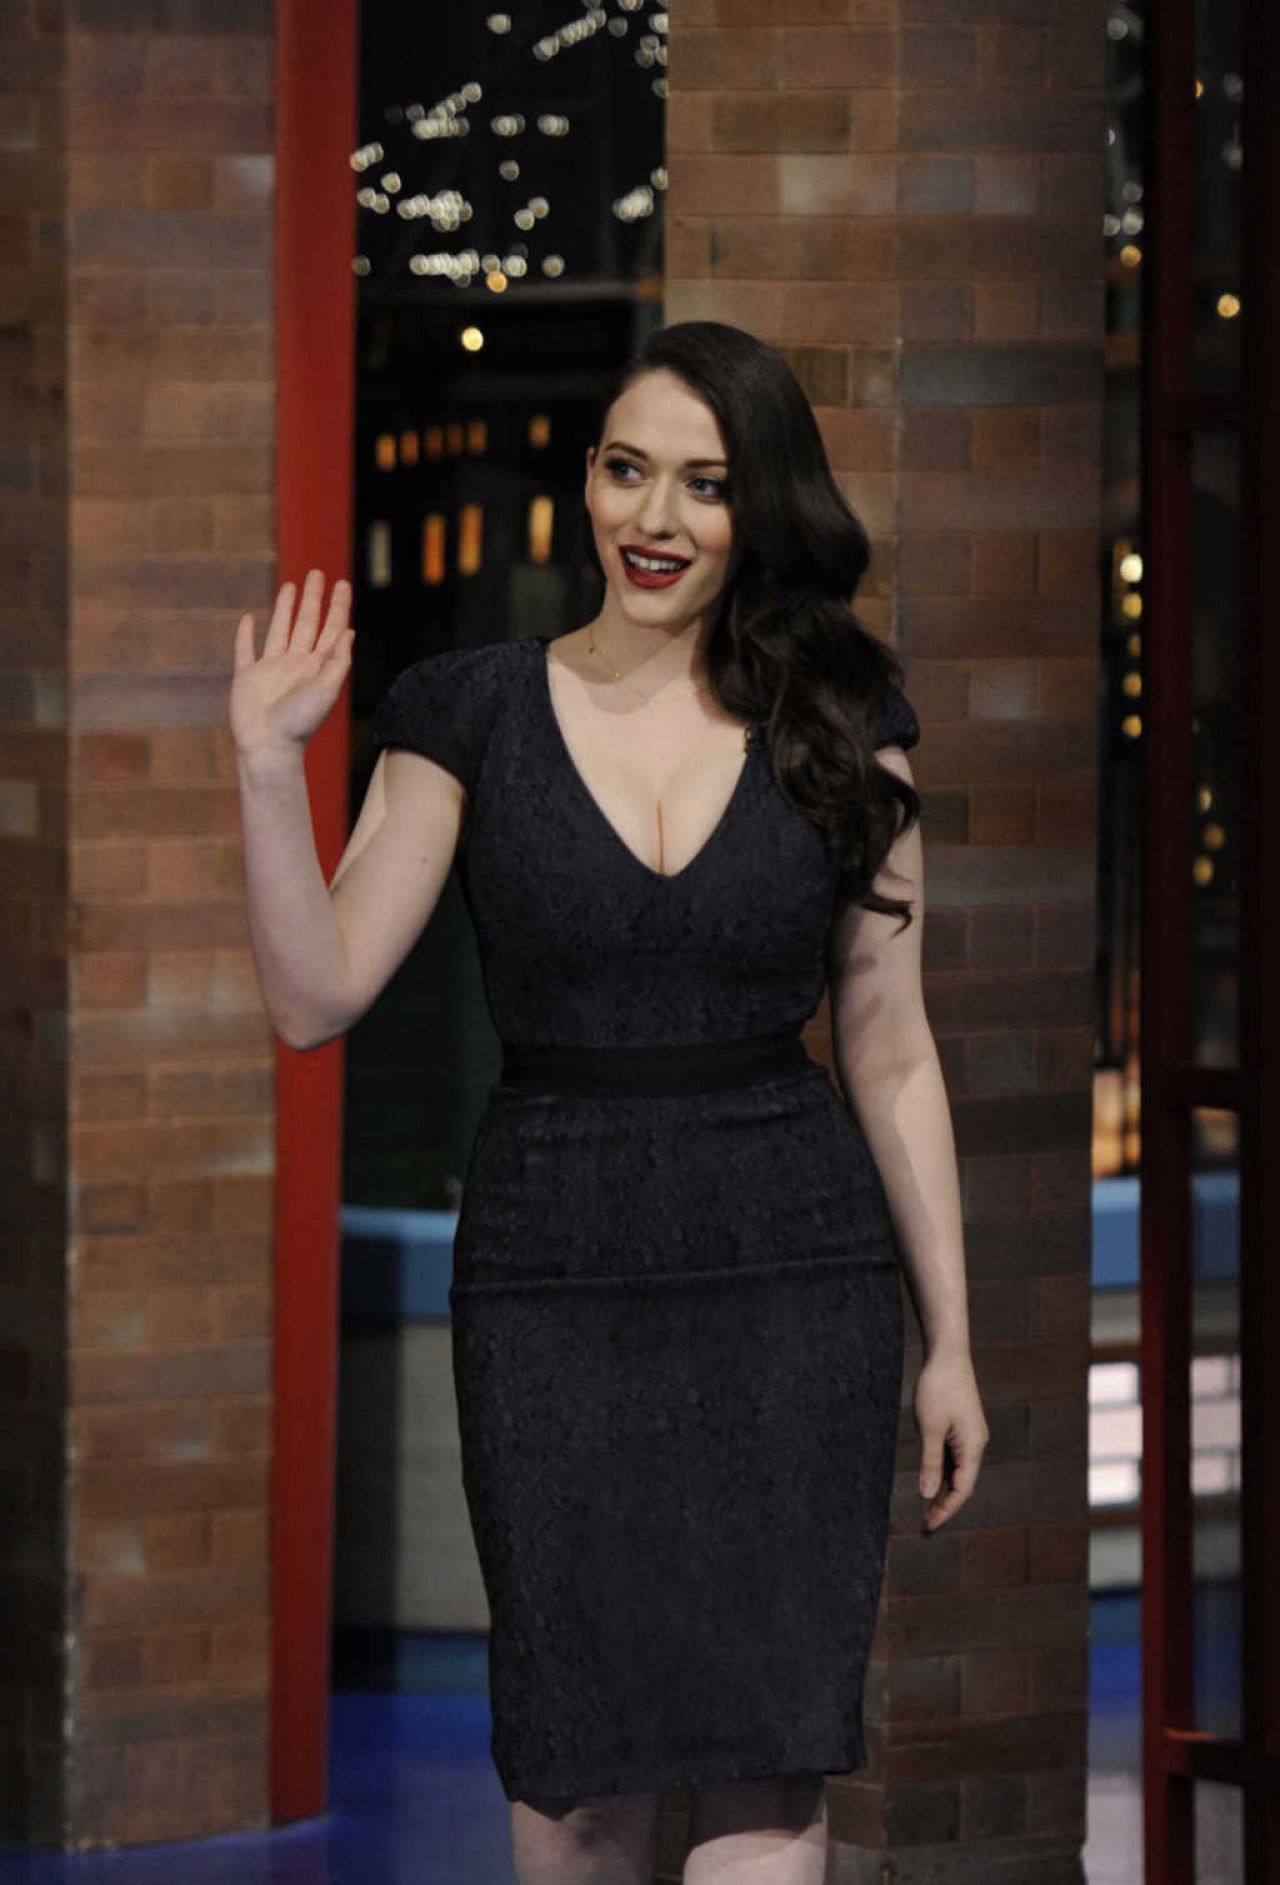 Kat Dennings Nude & Topless Leaked Pics! - Scandal Planet